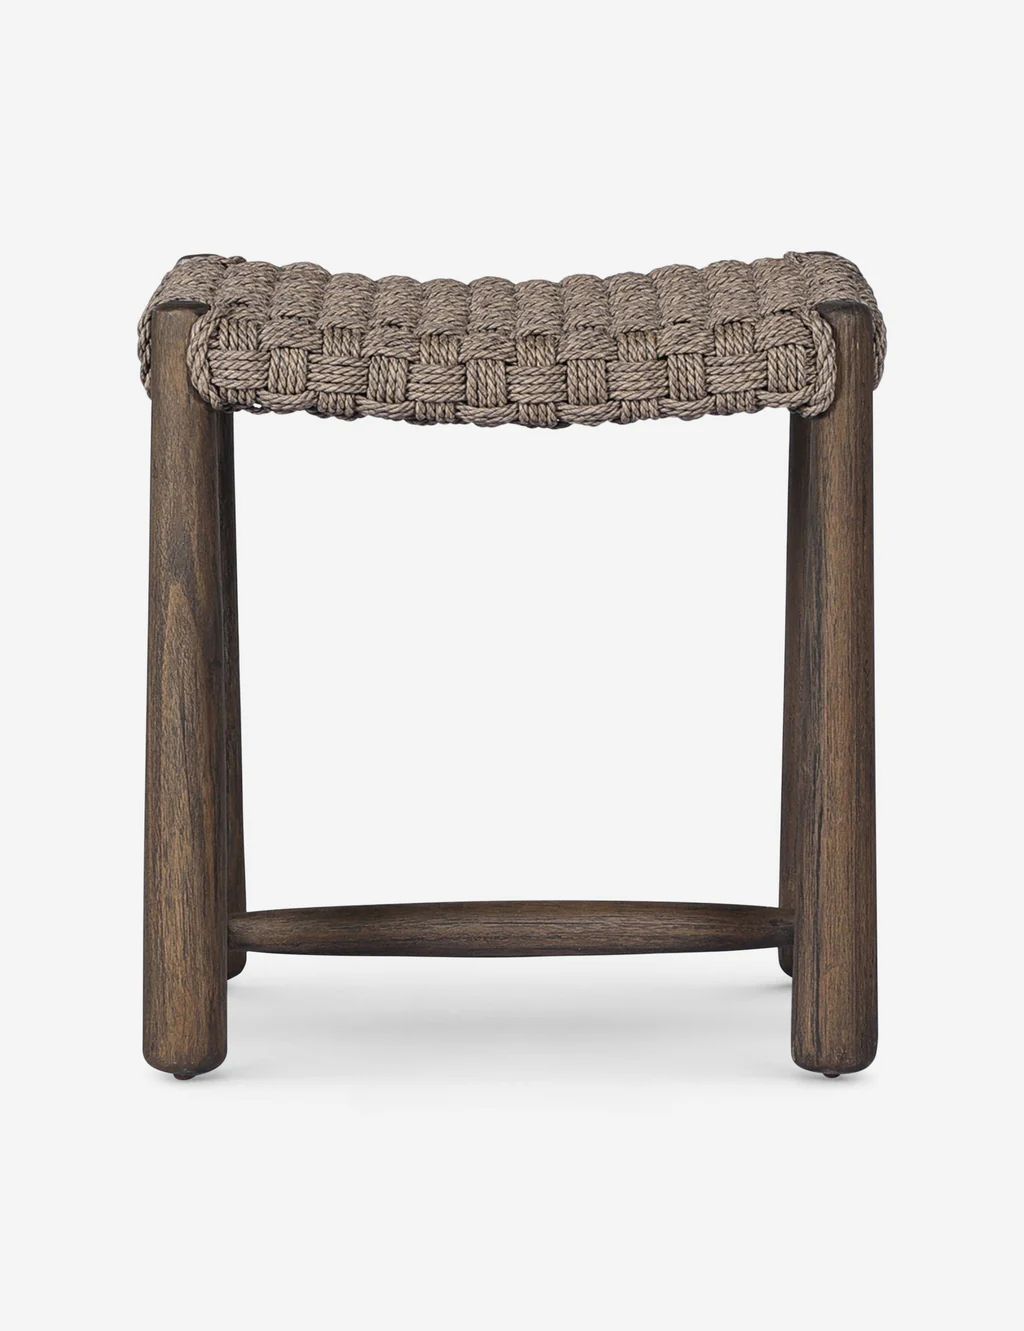 Savio Indoor / Outdoor Stool by Amber Lewis x Four Hands | Lulu and Georgia 